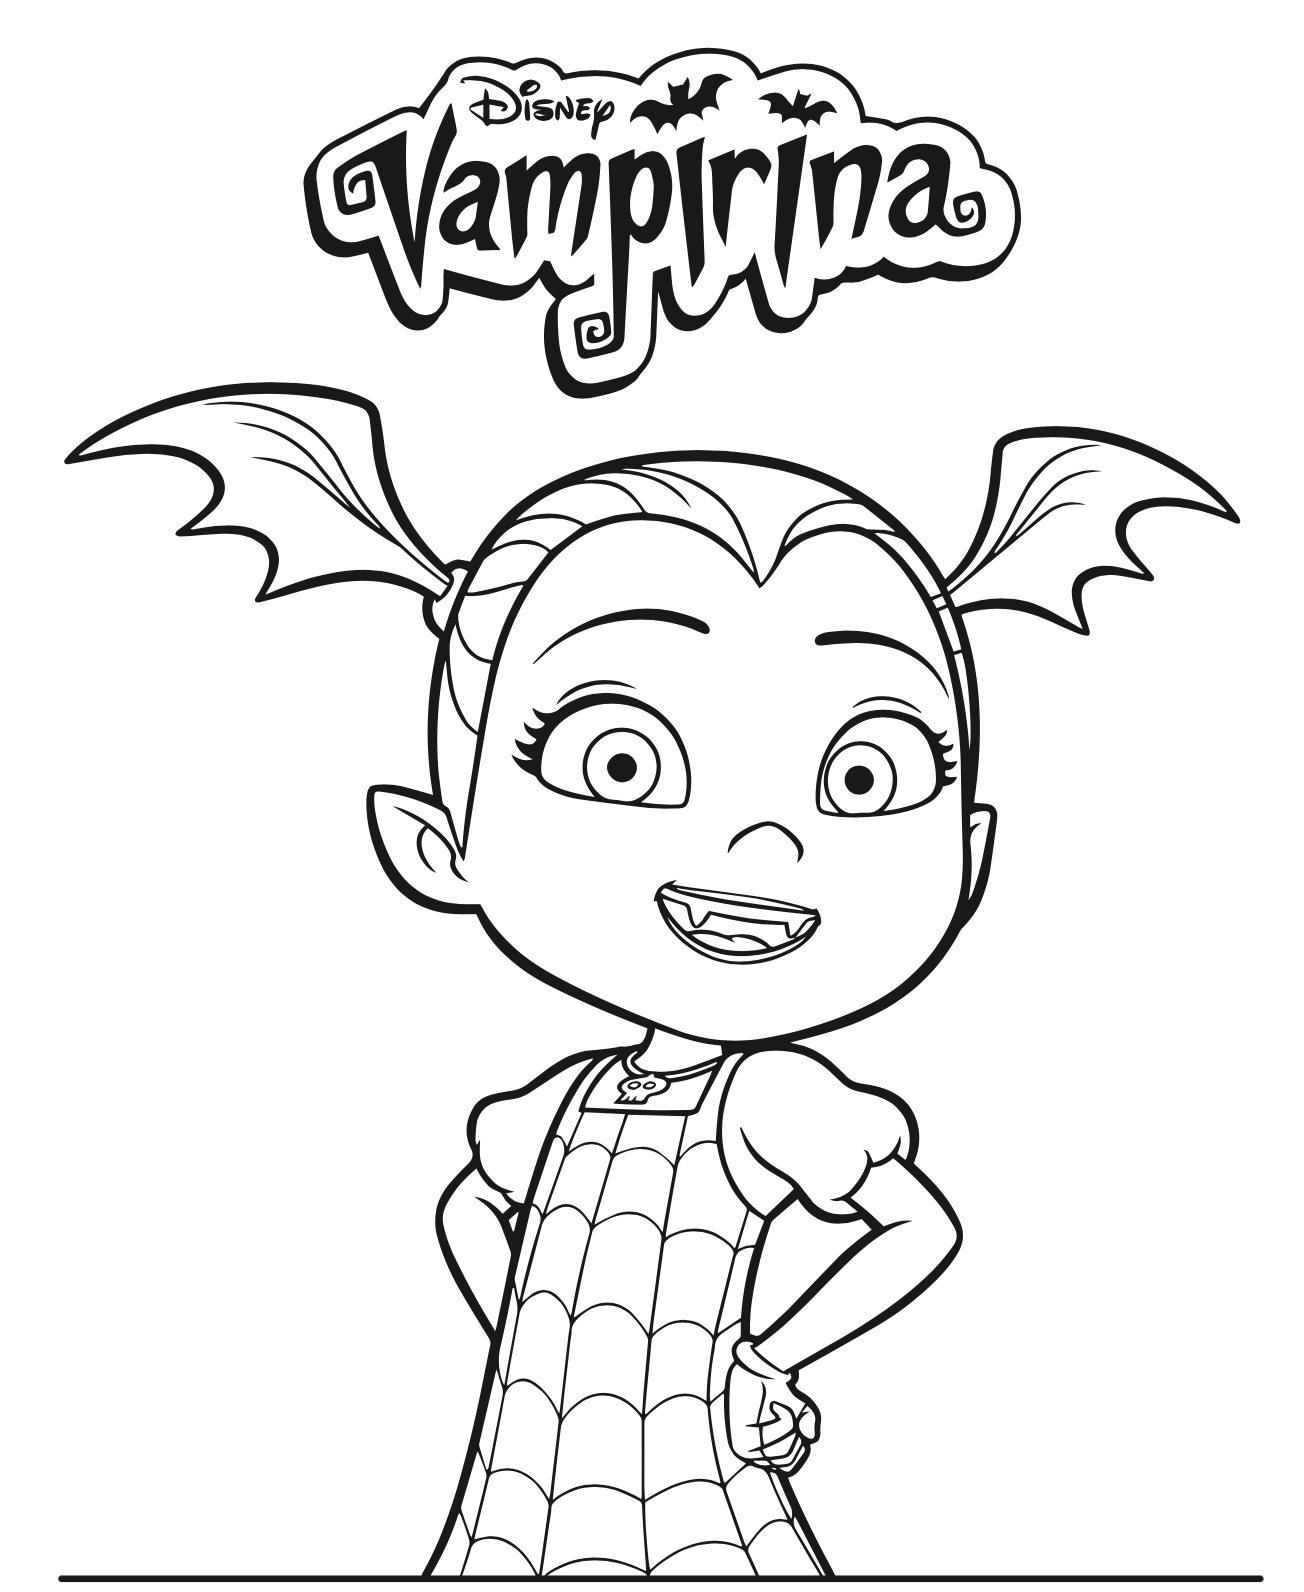 Vampirina Coloring Pages   Free Printable Coloring Pages for Kids